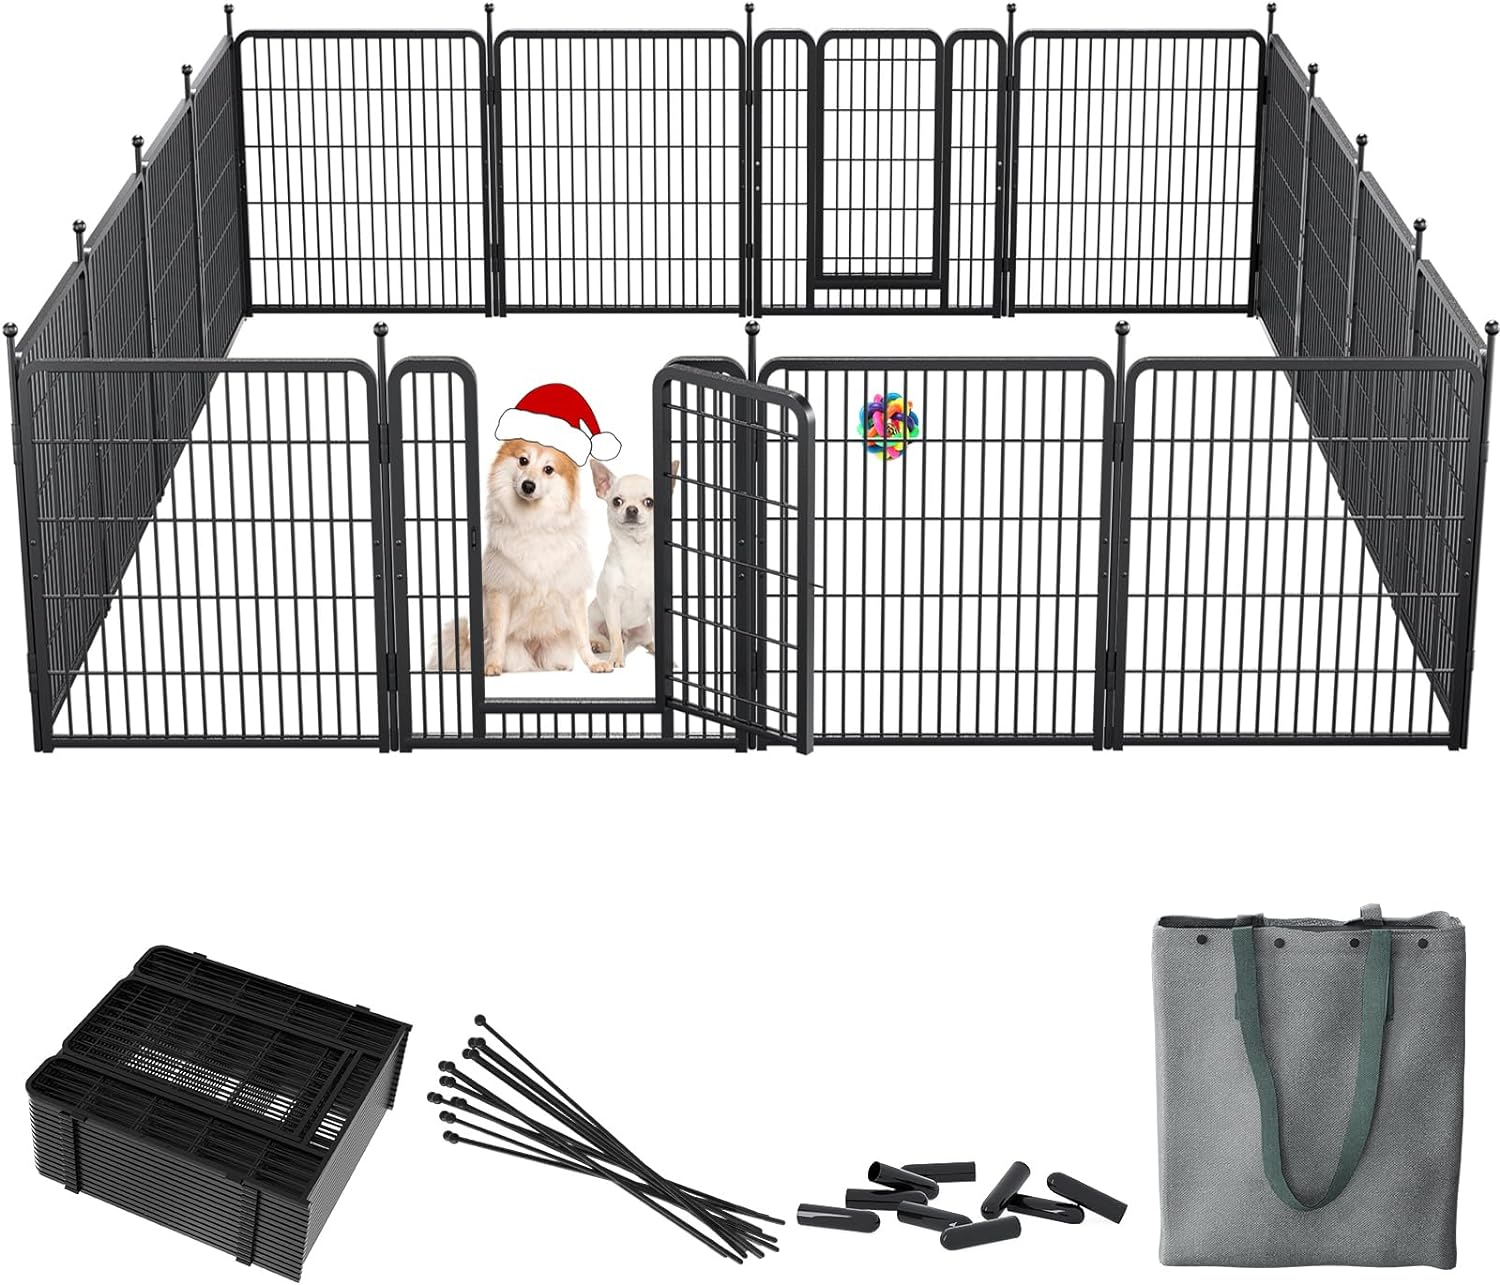 Homieasy Dog Playpen with Storage Bag for RV Camping, 32 Inch Height - $115